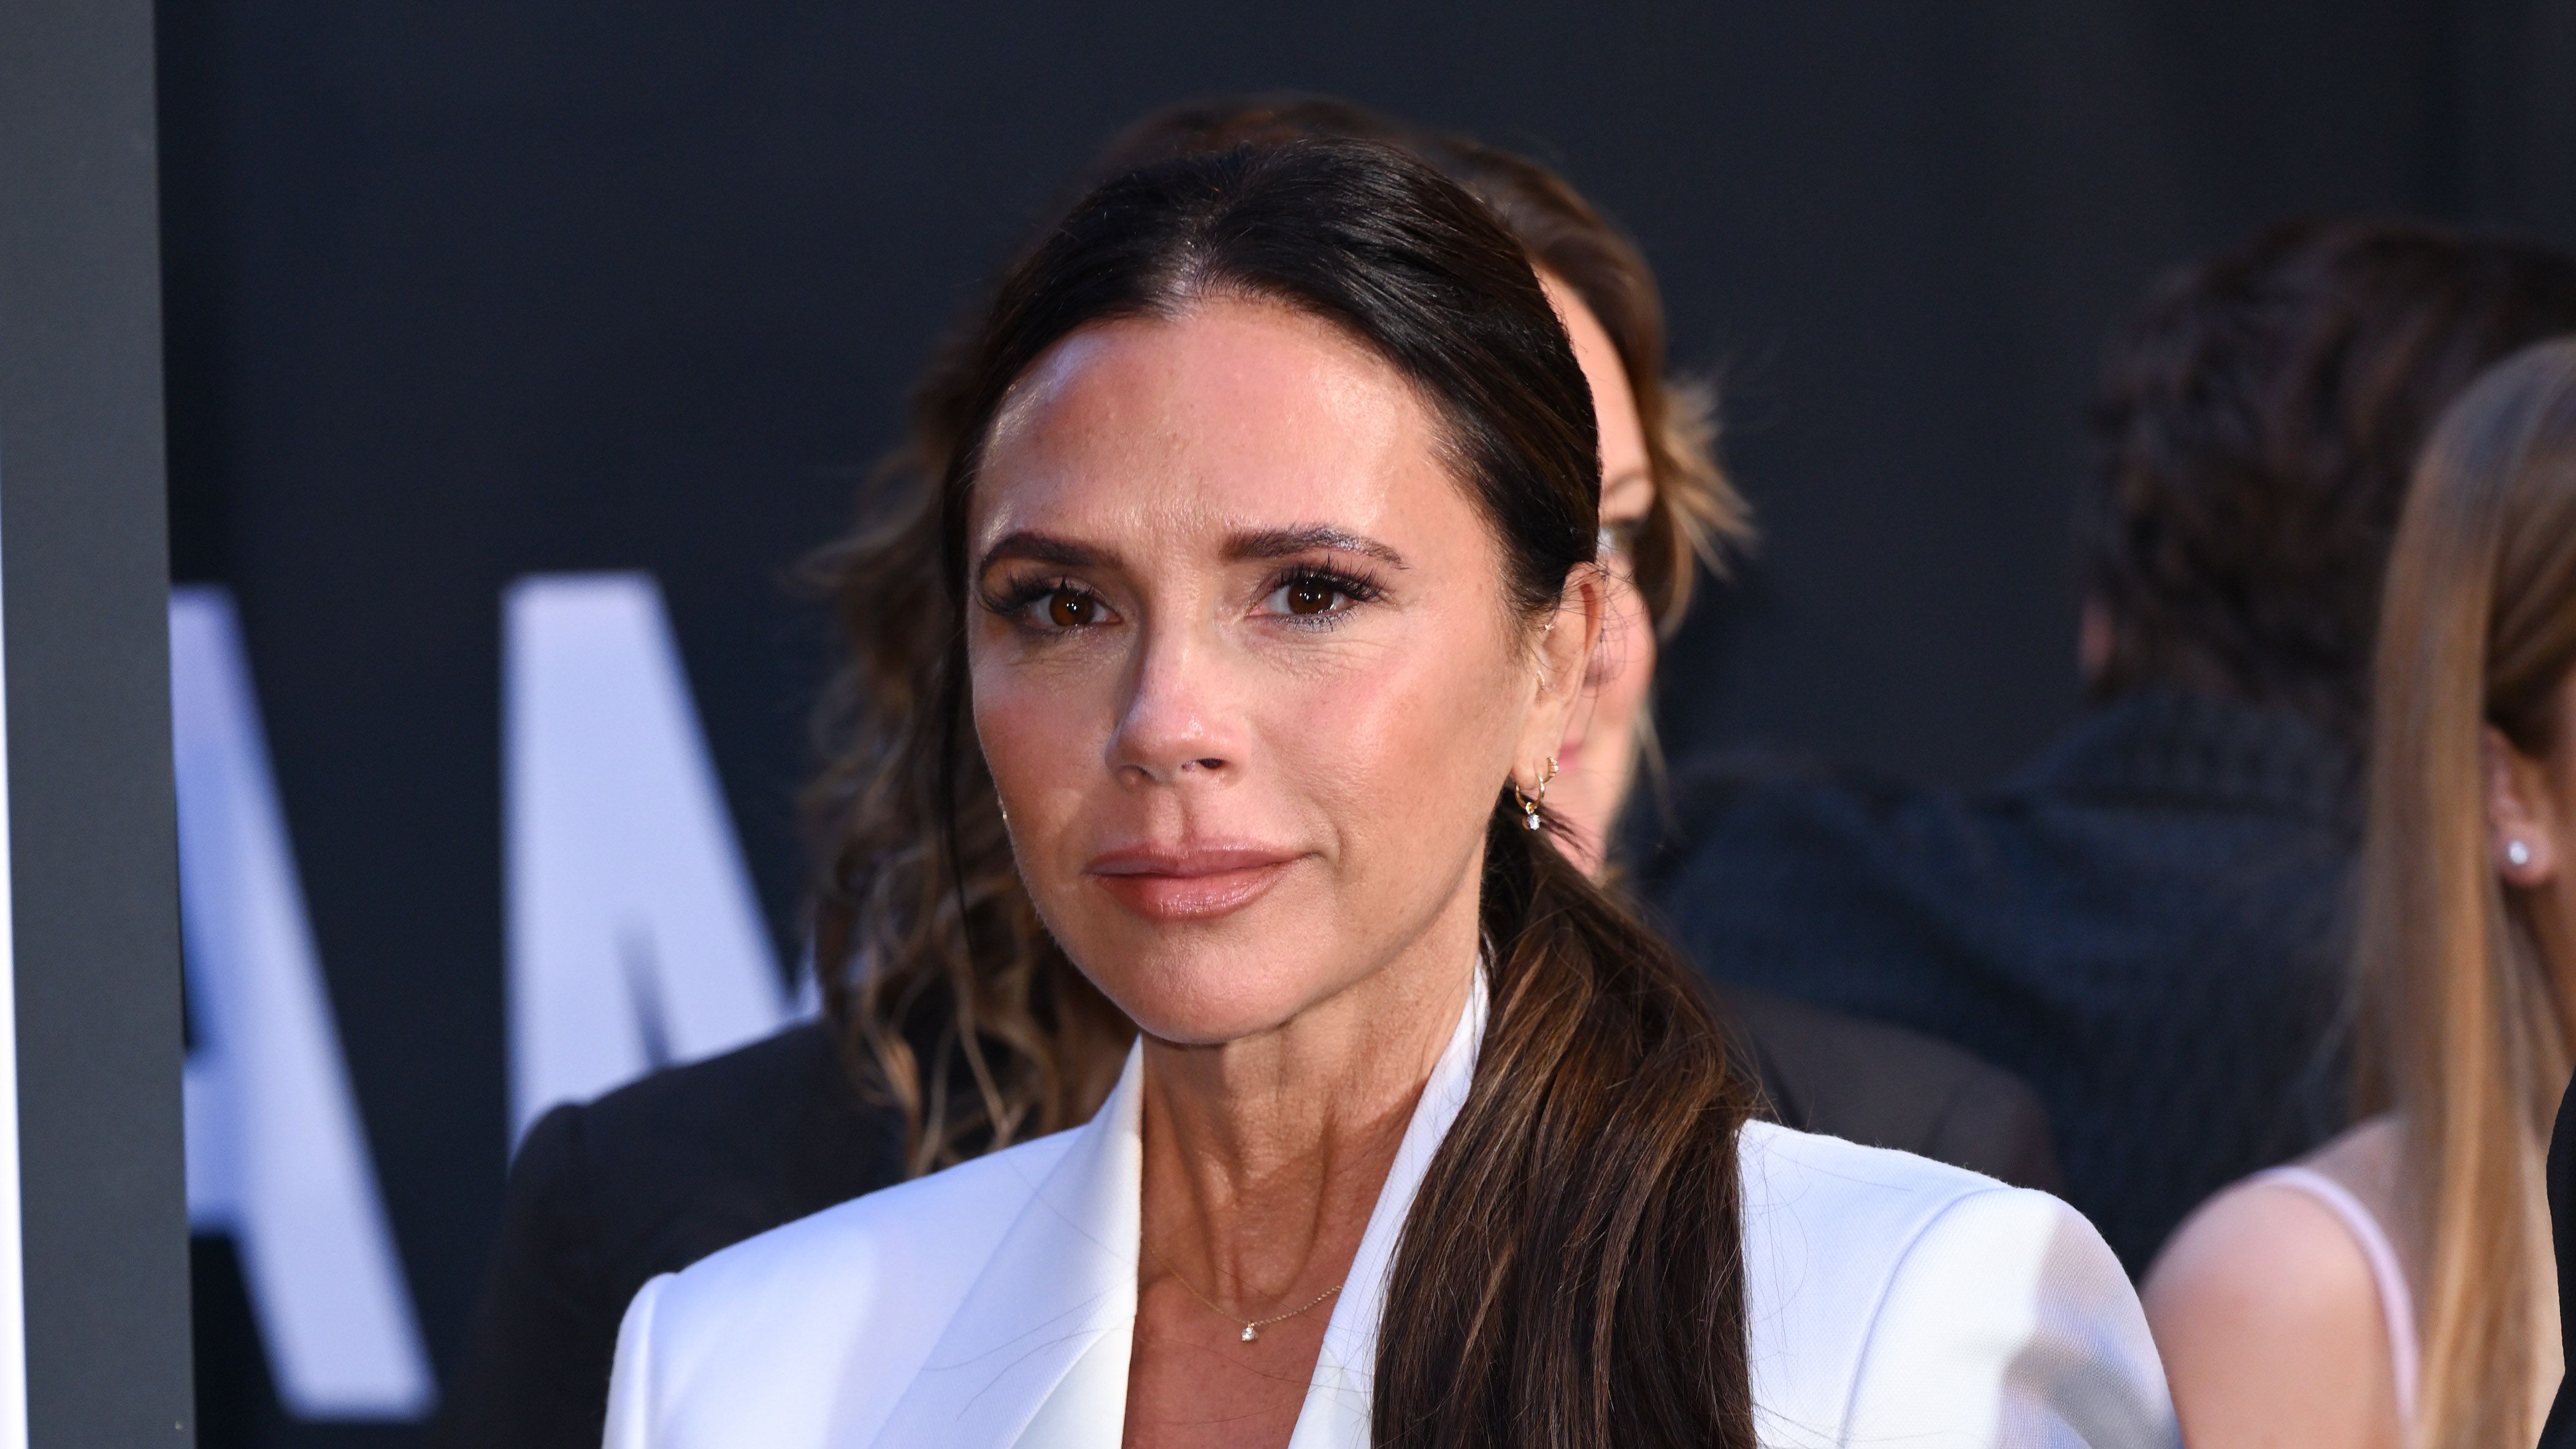 Why do celebs like Victoria Beckham pretend they're working class?